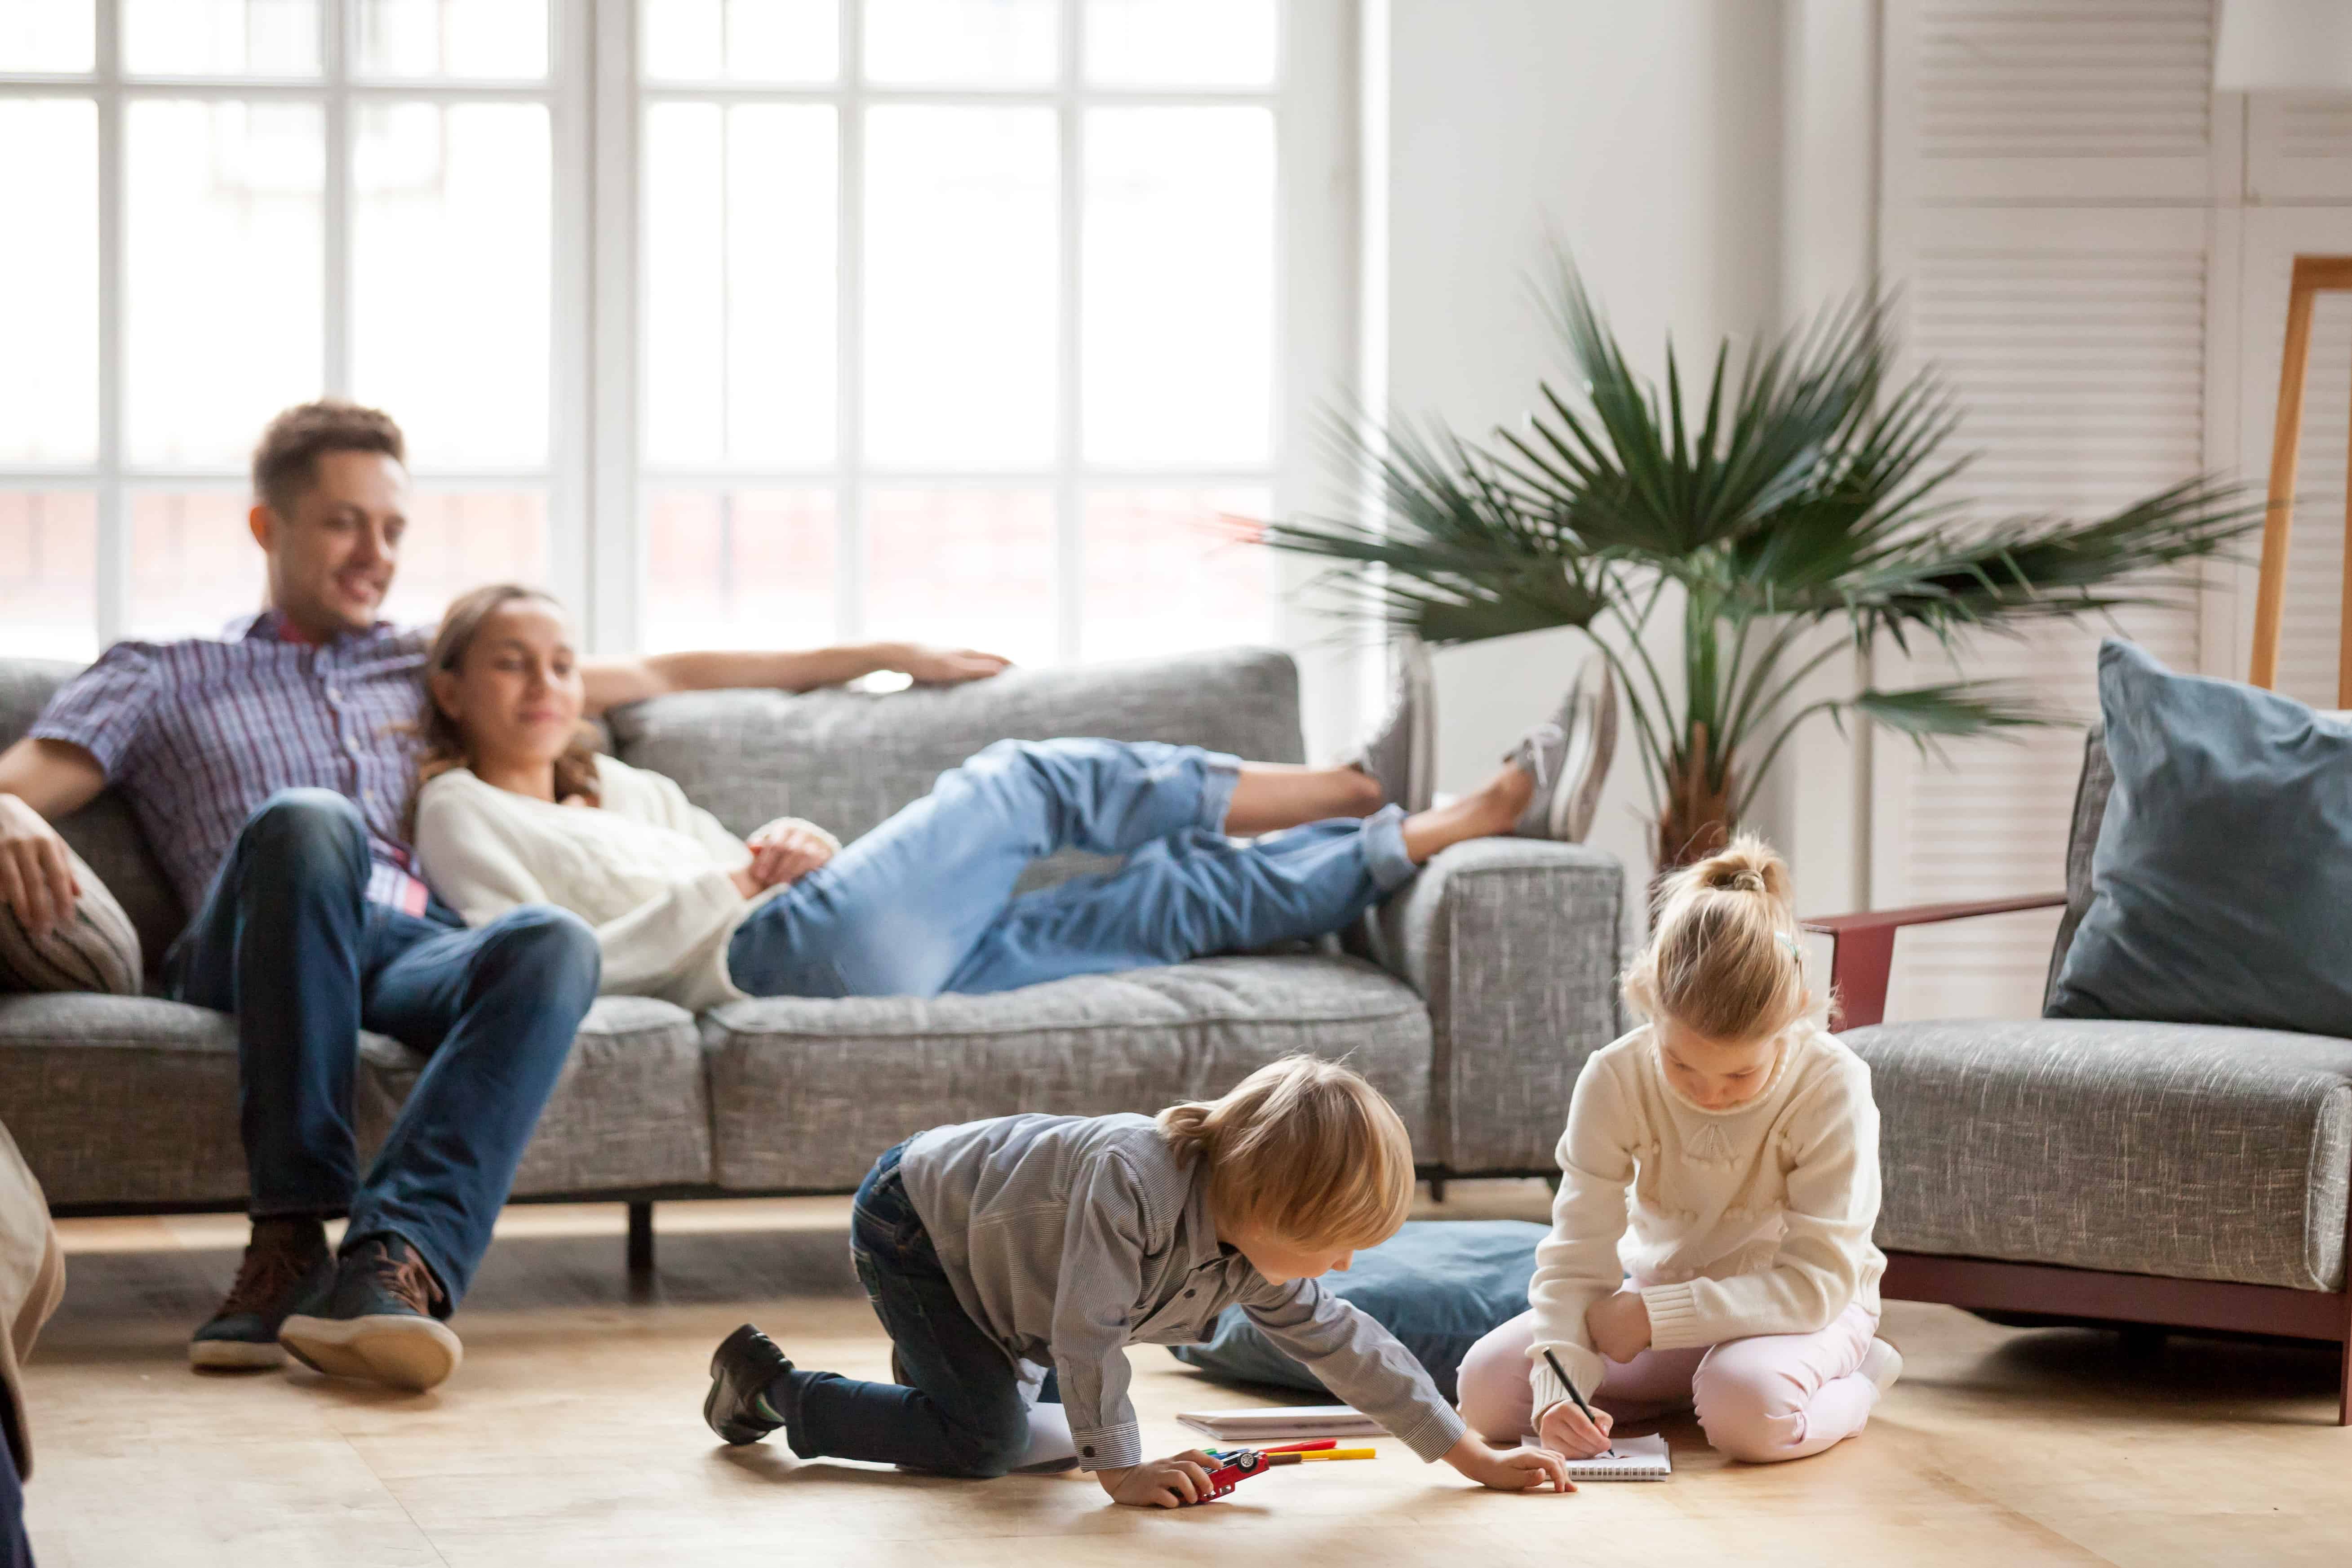 signs of parental burnout, setting boundaries, parents watch their kids playing in the living room